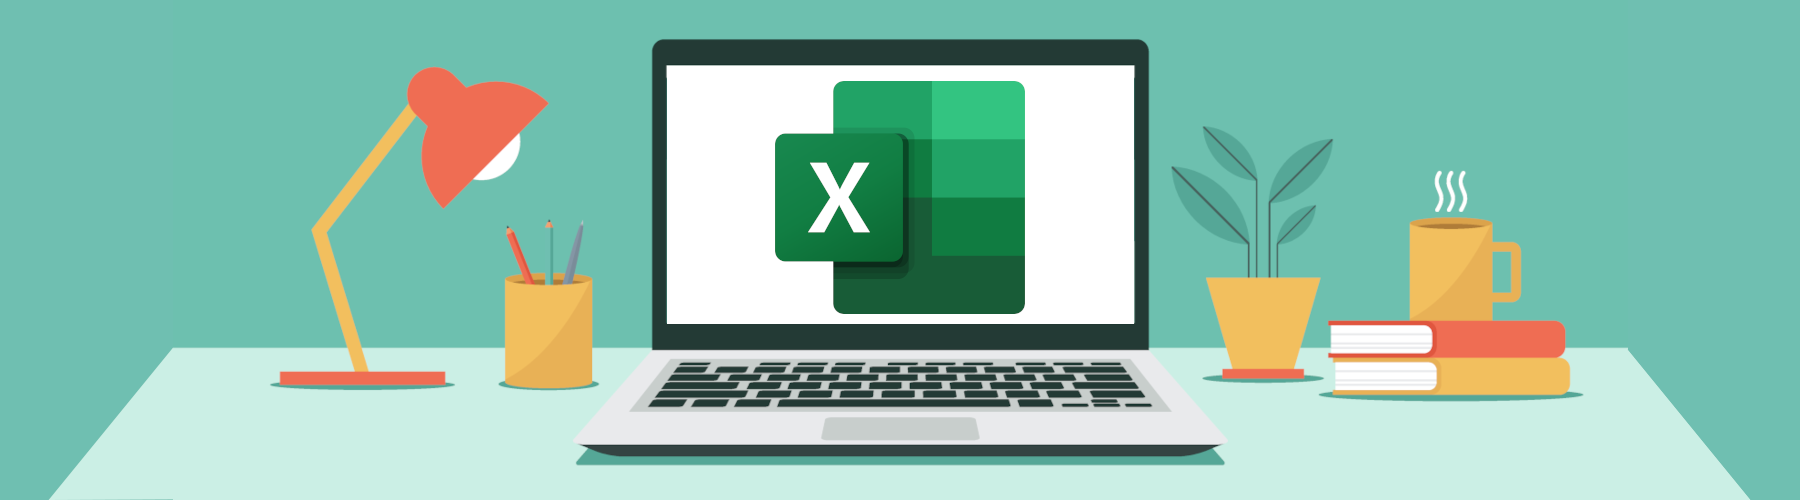 Online Microsoft Excel Training get better results with Glide